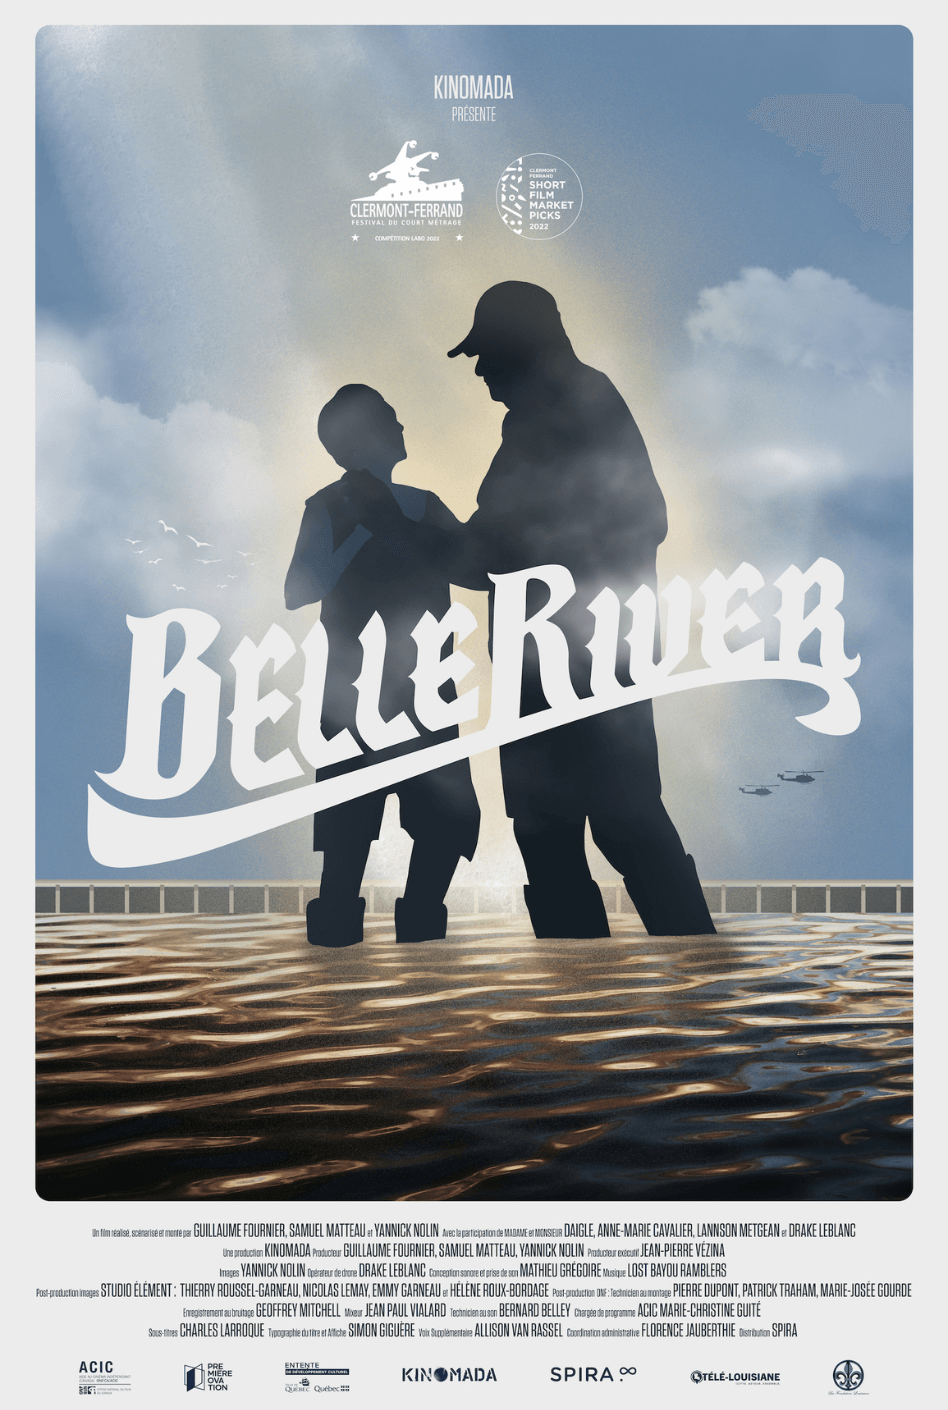 images/bottin_films/b2d680e5e3170a501036415eb5e5e857-Belle-river-affiche-poster.png#joomlaImage://local-images/bottin_films/b2d680e5e3170a501036415eb5e5e857-Belle-river-affiche-poster.png?width=948&height=1410